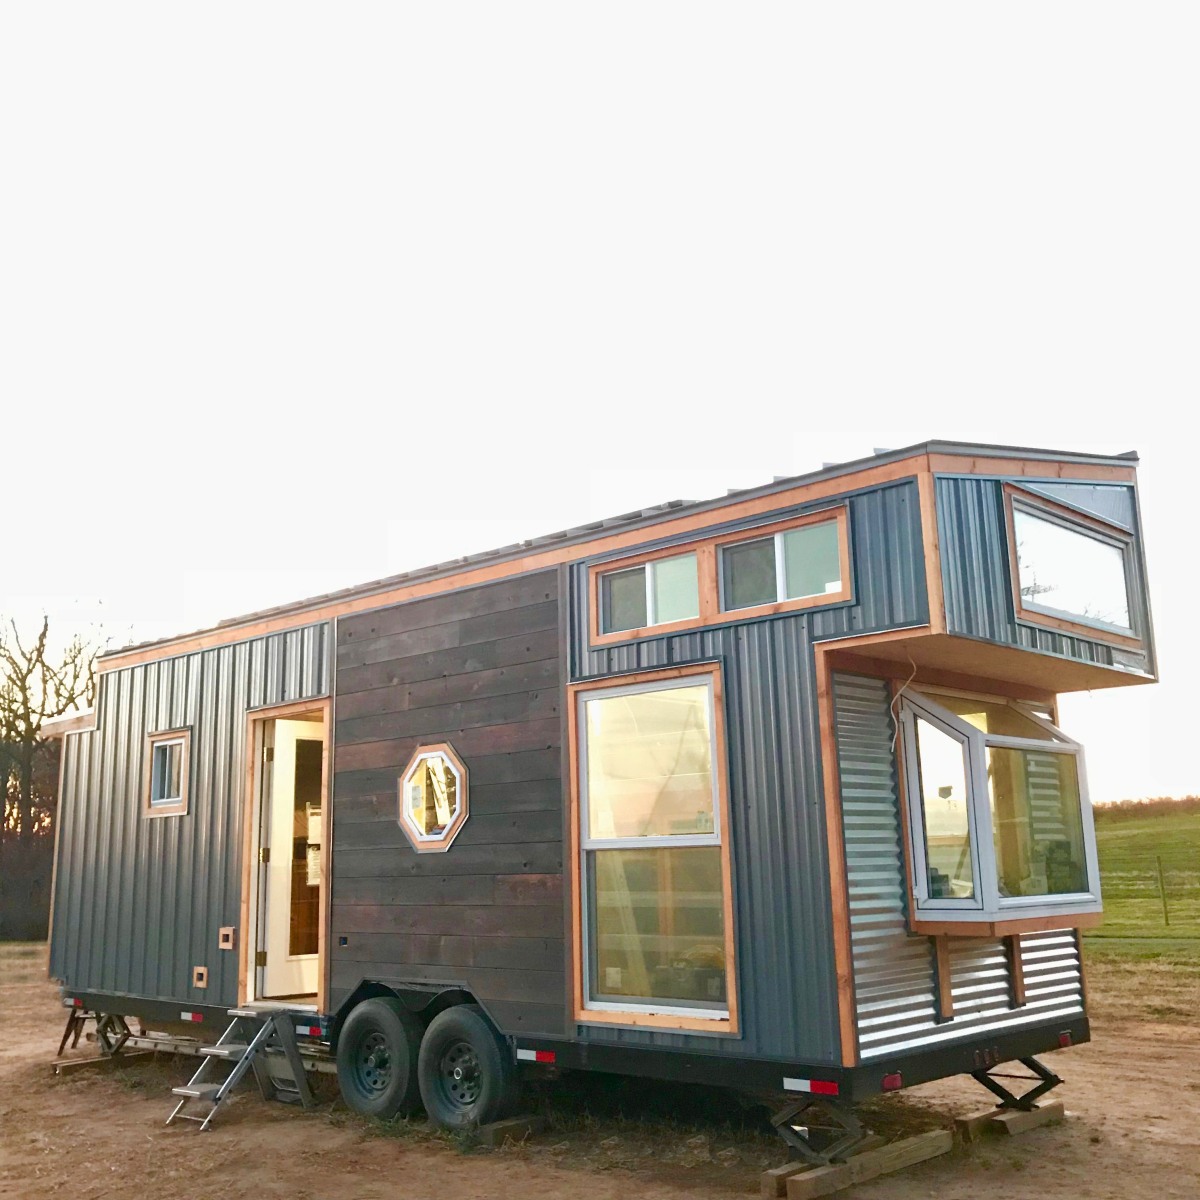 Introducing the Minimus Tiny House